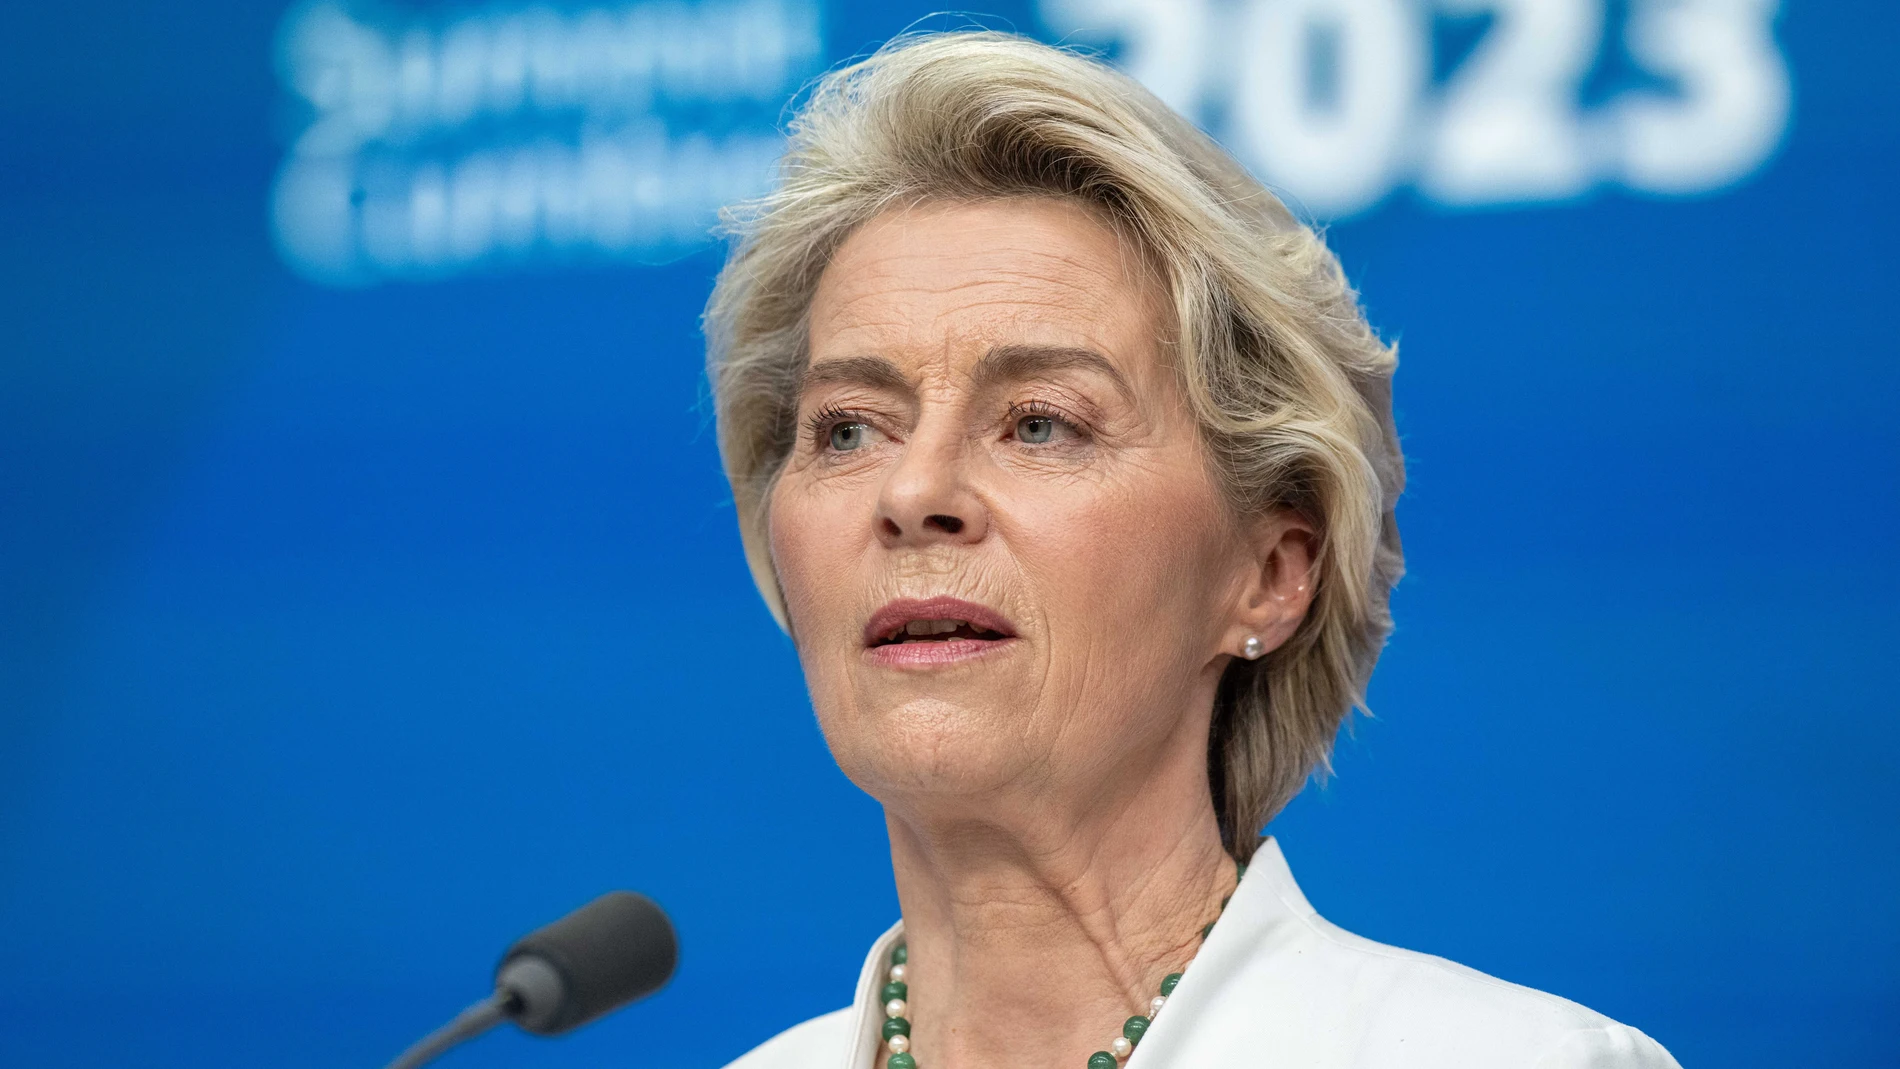 European Commission President Ursula Von der Leyen is seen at a press conference after the second day of the EU - CELAC (Comunidad de Estados Latinoamericanos y Caribenos - Community of Latin American and Caribbean States) summit, in Brussels, Tuesday 18 July 2023. The EU-CELAC summits bring together European, Latin American and Caribbean heads of state and government to strengthen relations between these regions. (Foto de ARCHIVO)18/07/2023